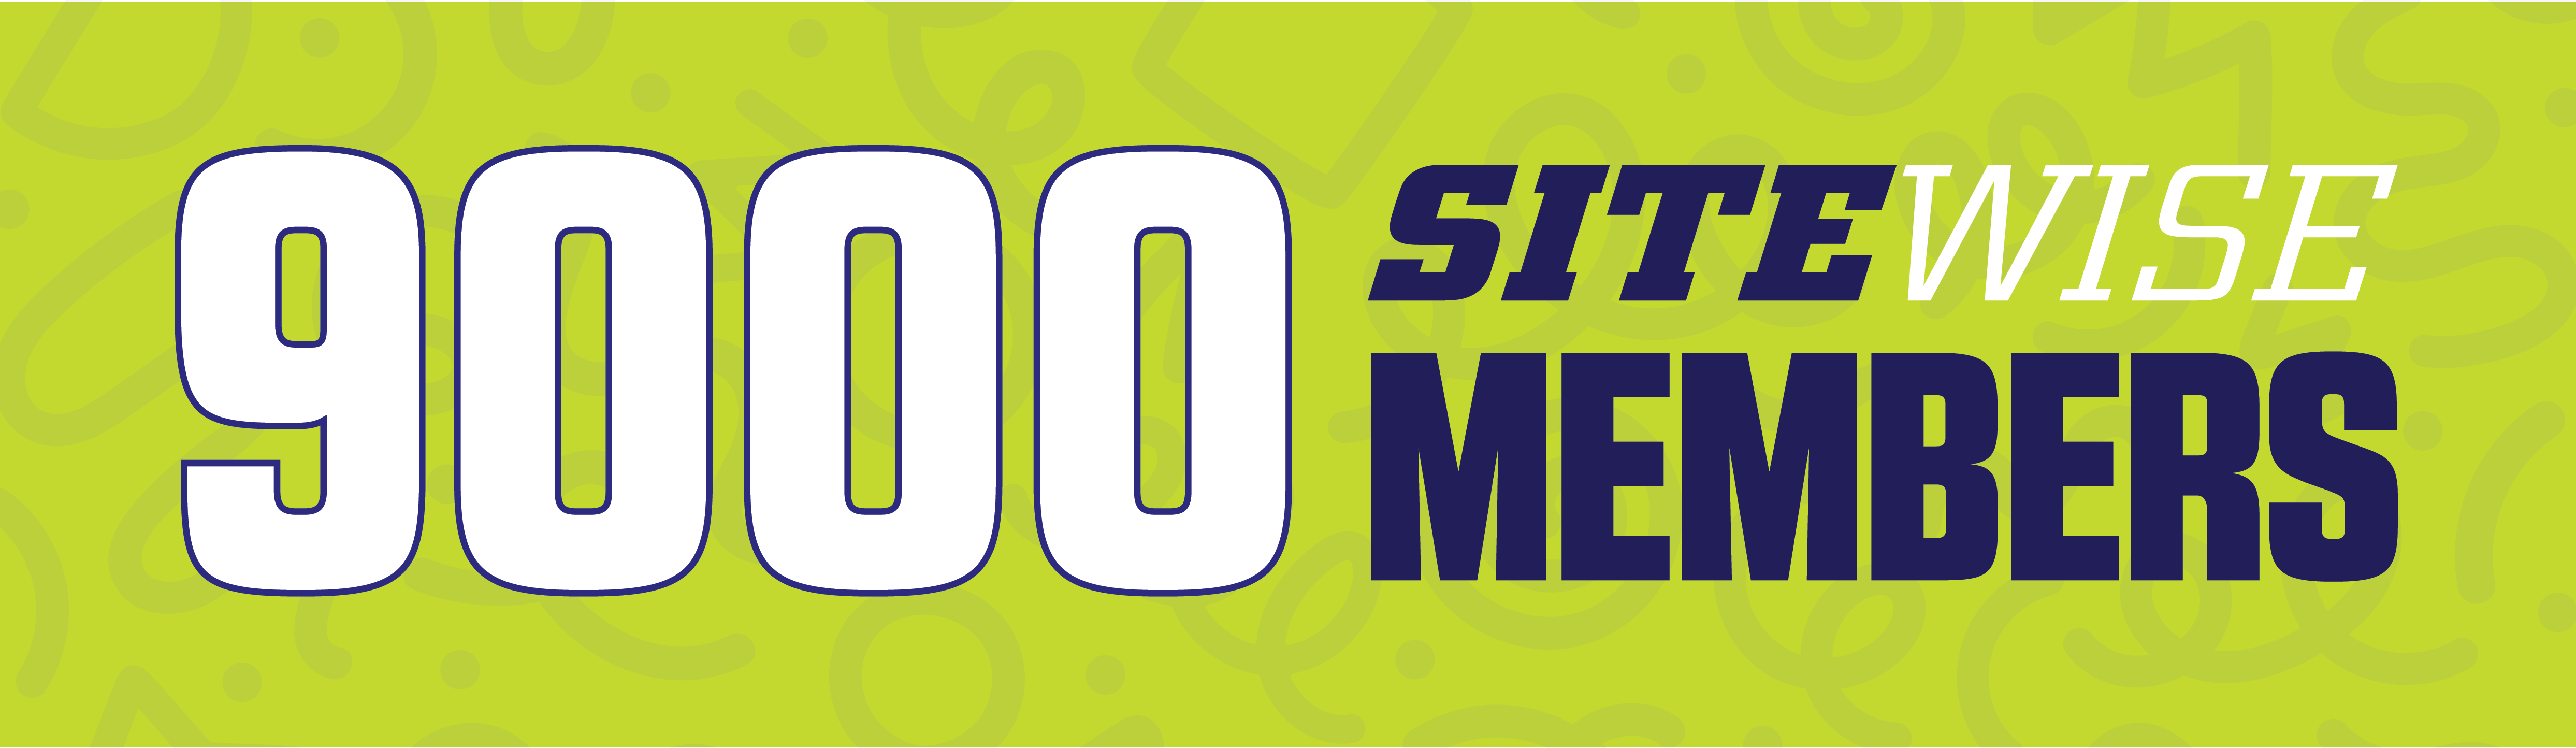 SiteWise_9000_Members_Banner.png